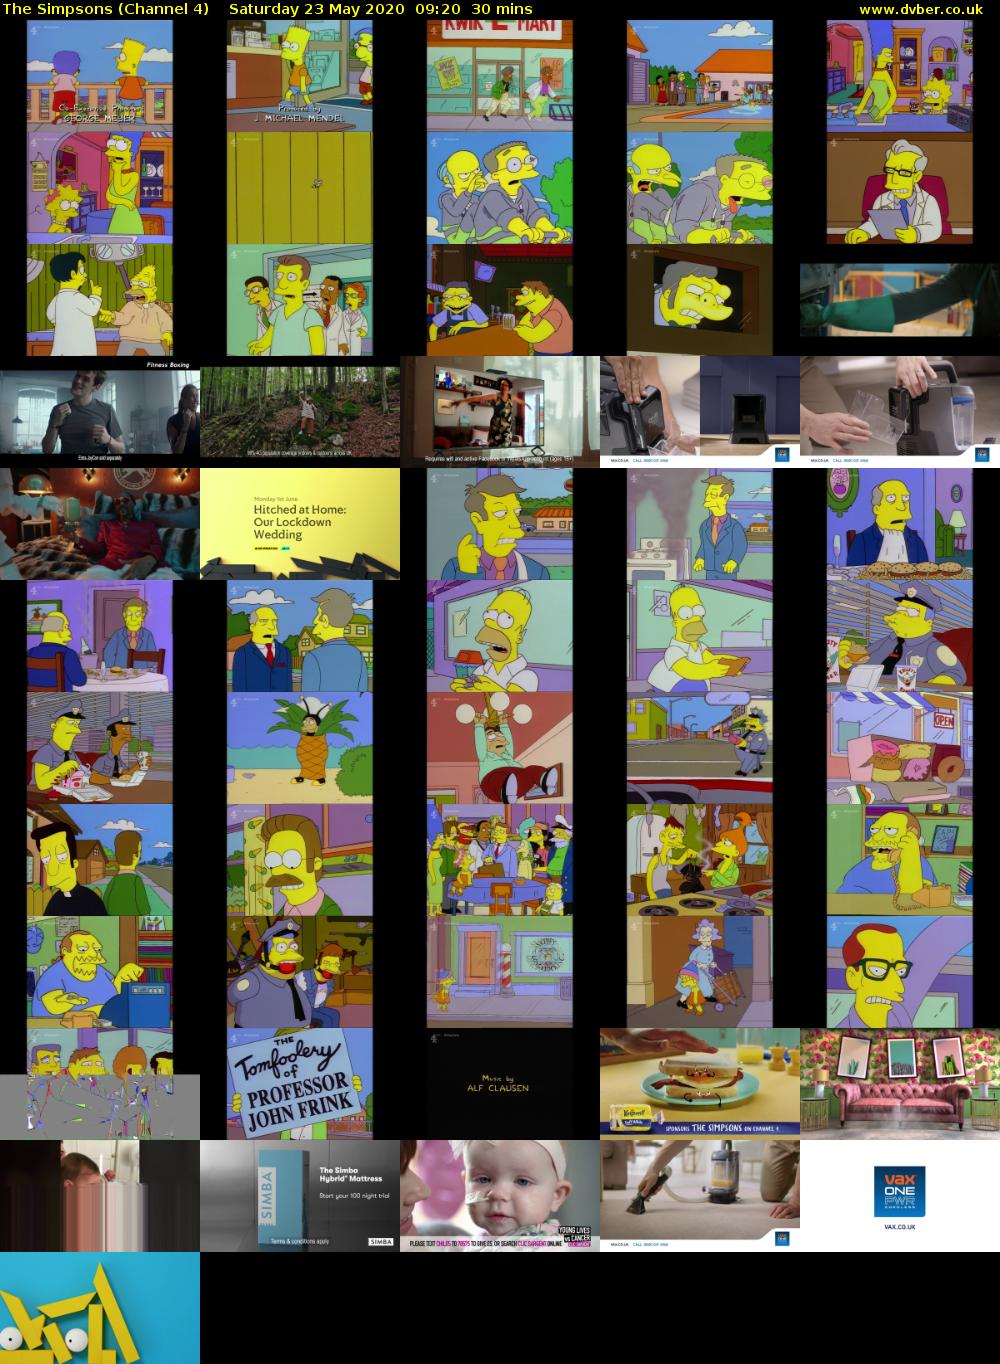 The Simpsons (Channel 4) Saturday 23 May 2020 09:20 - 09:50